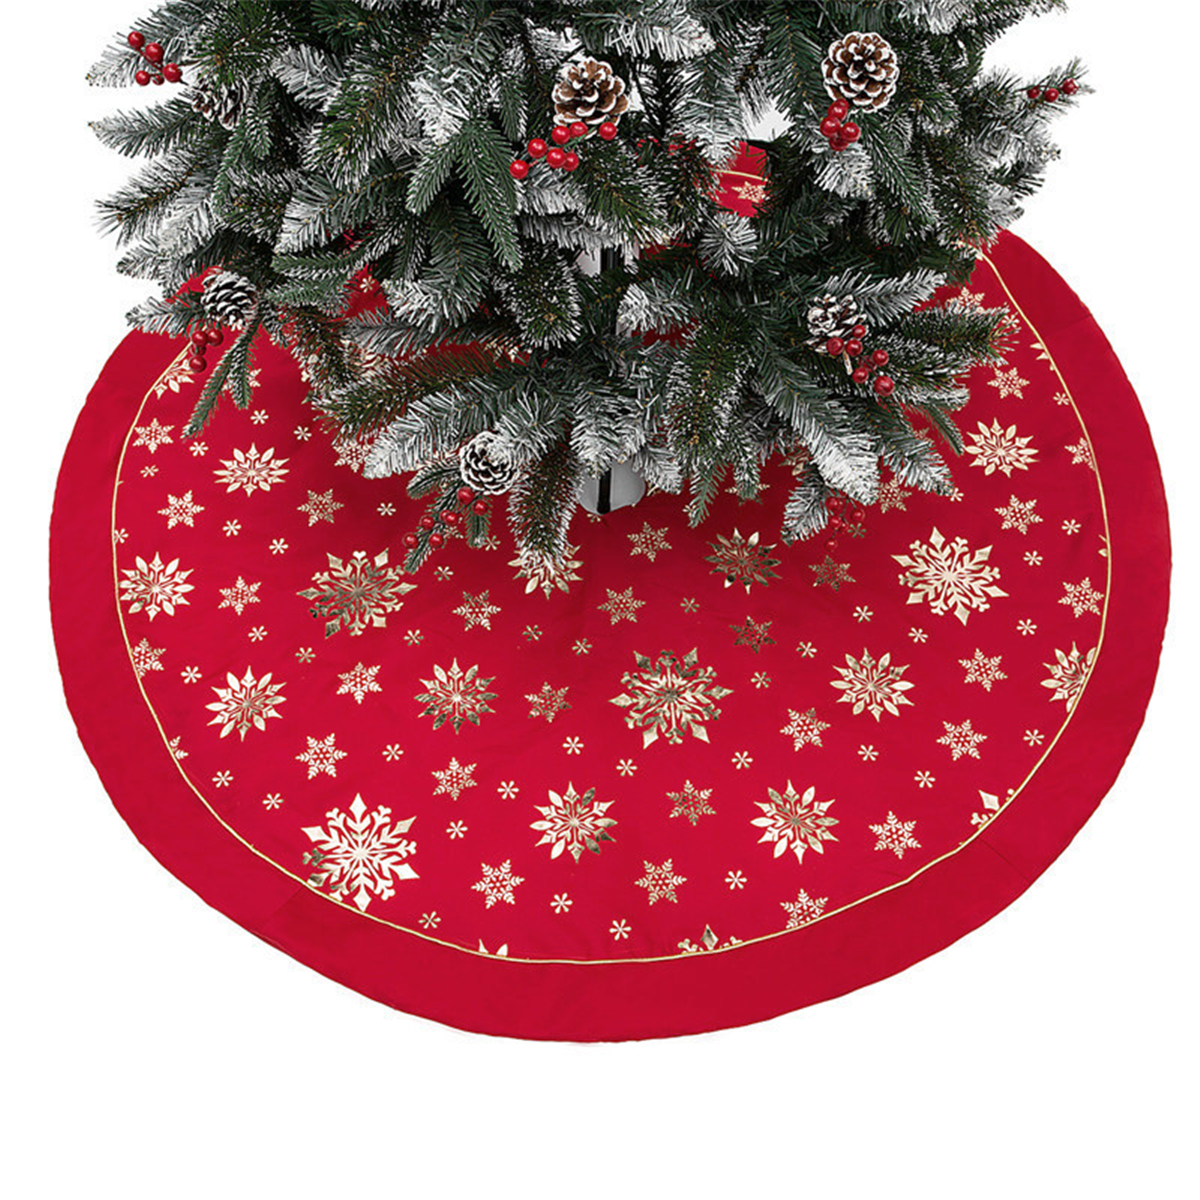 120cm-Stitched-Santa-Christmas-Snowflake-Skir-Tree-Skirt-for-Home-New-Year-2020-Christmas-Fancy-Deco-1770958-9